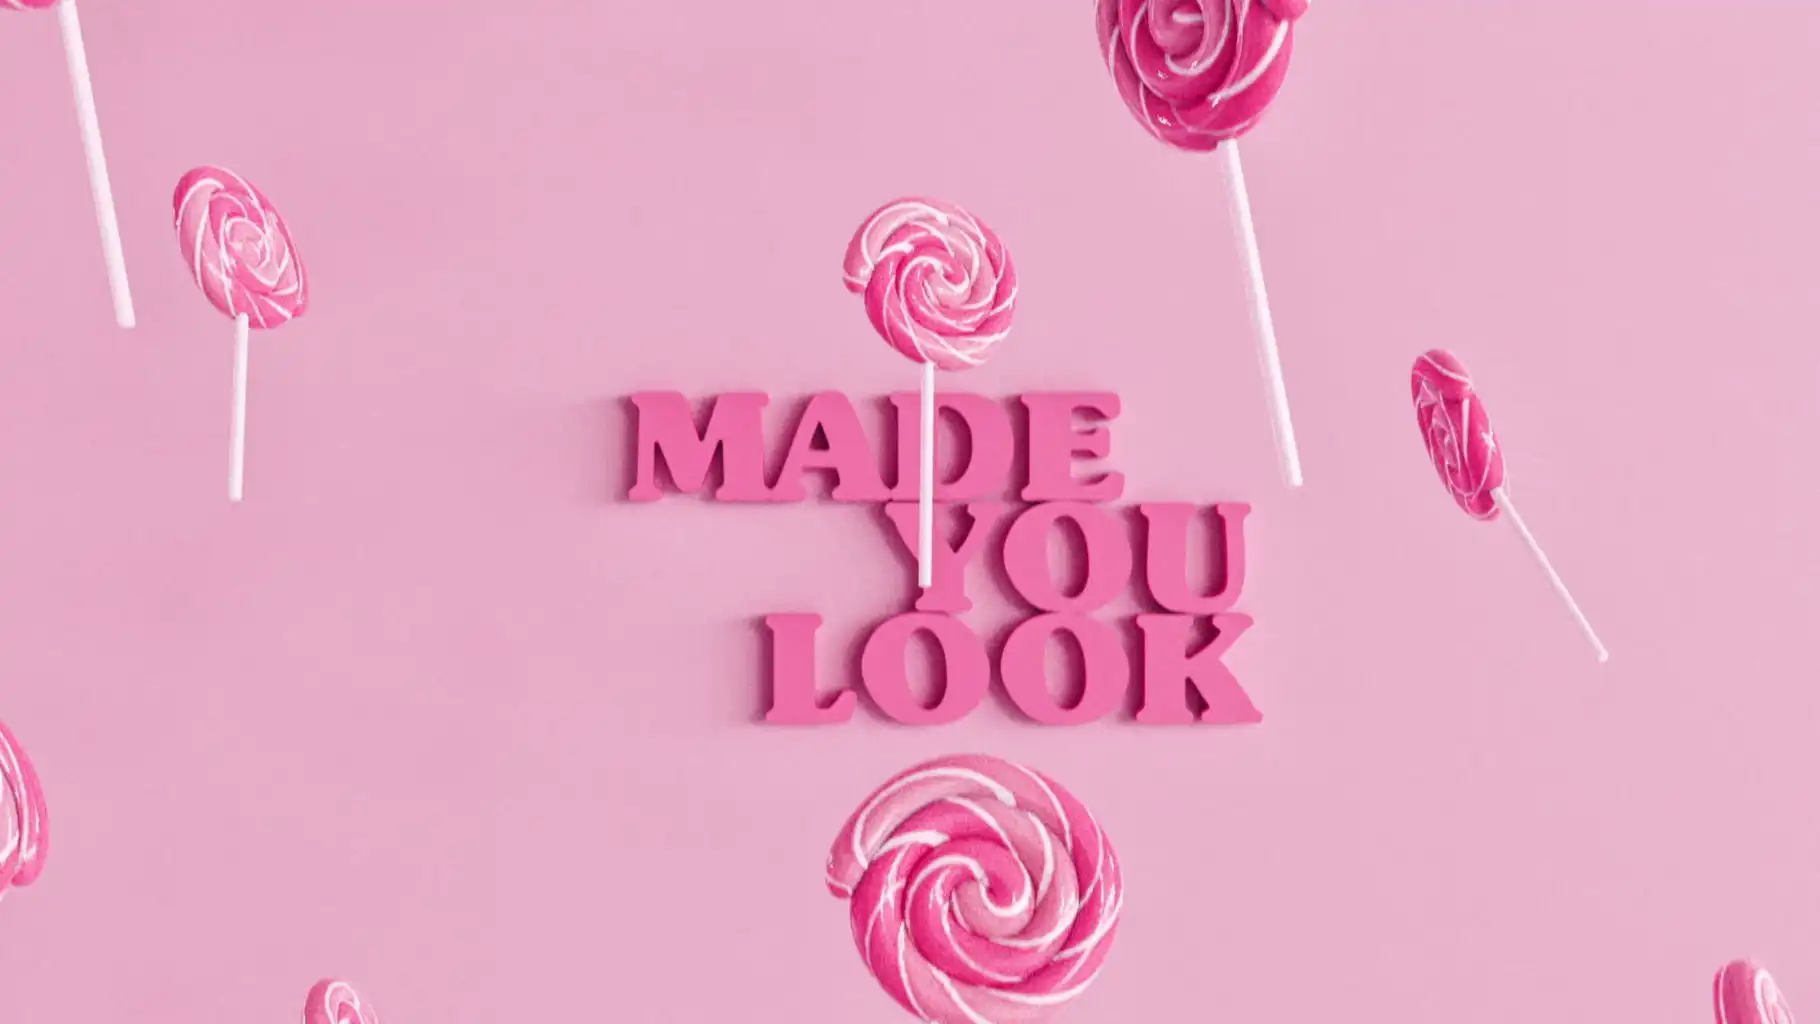 Stream Meghan Trainor - Made You Look (M.E. Remix) by My